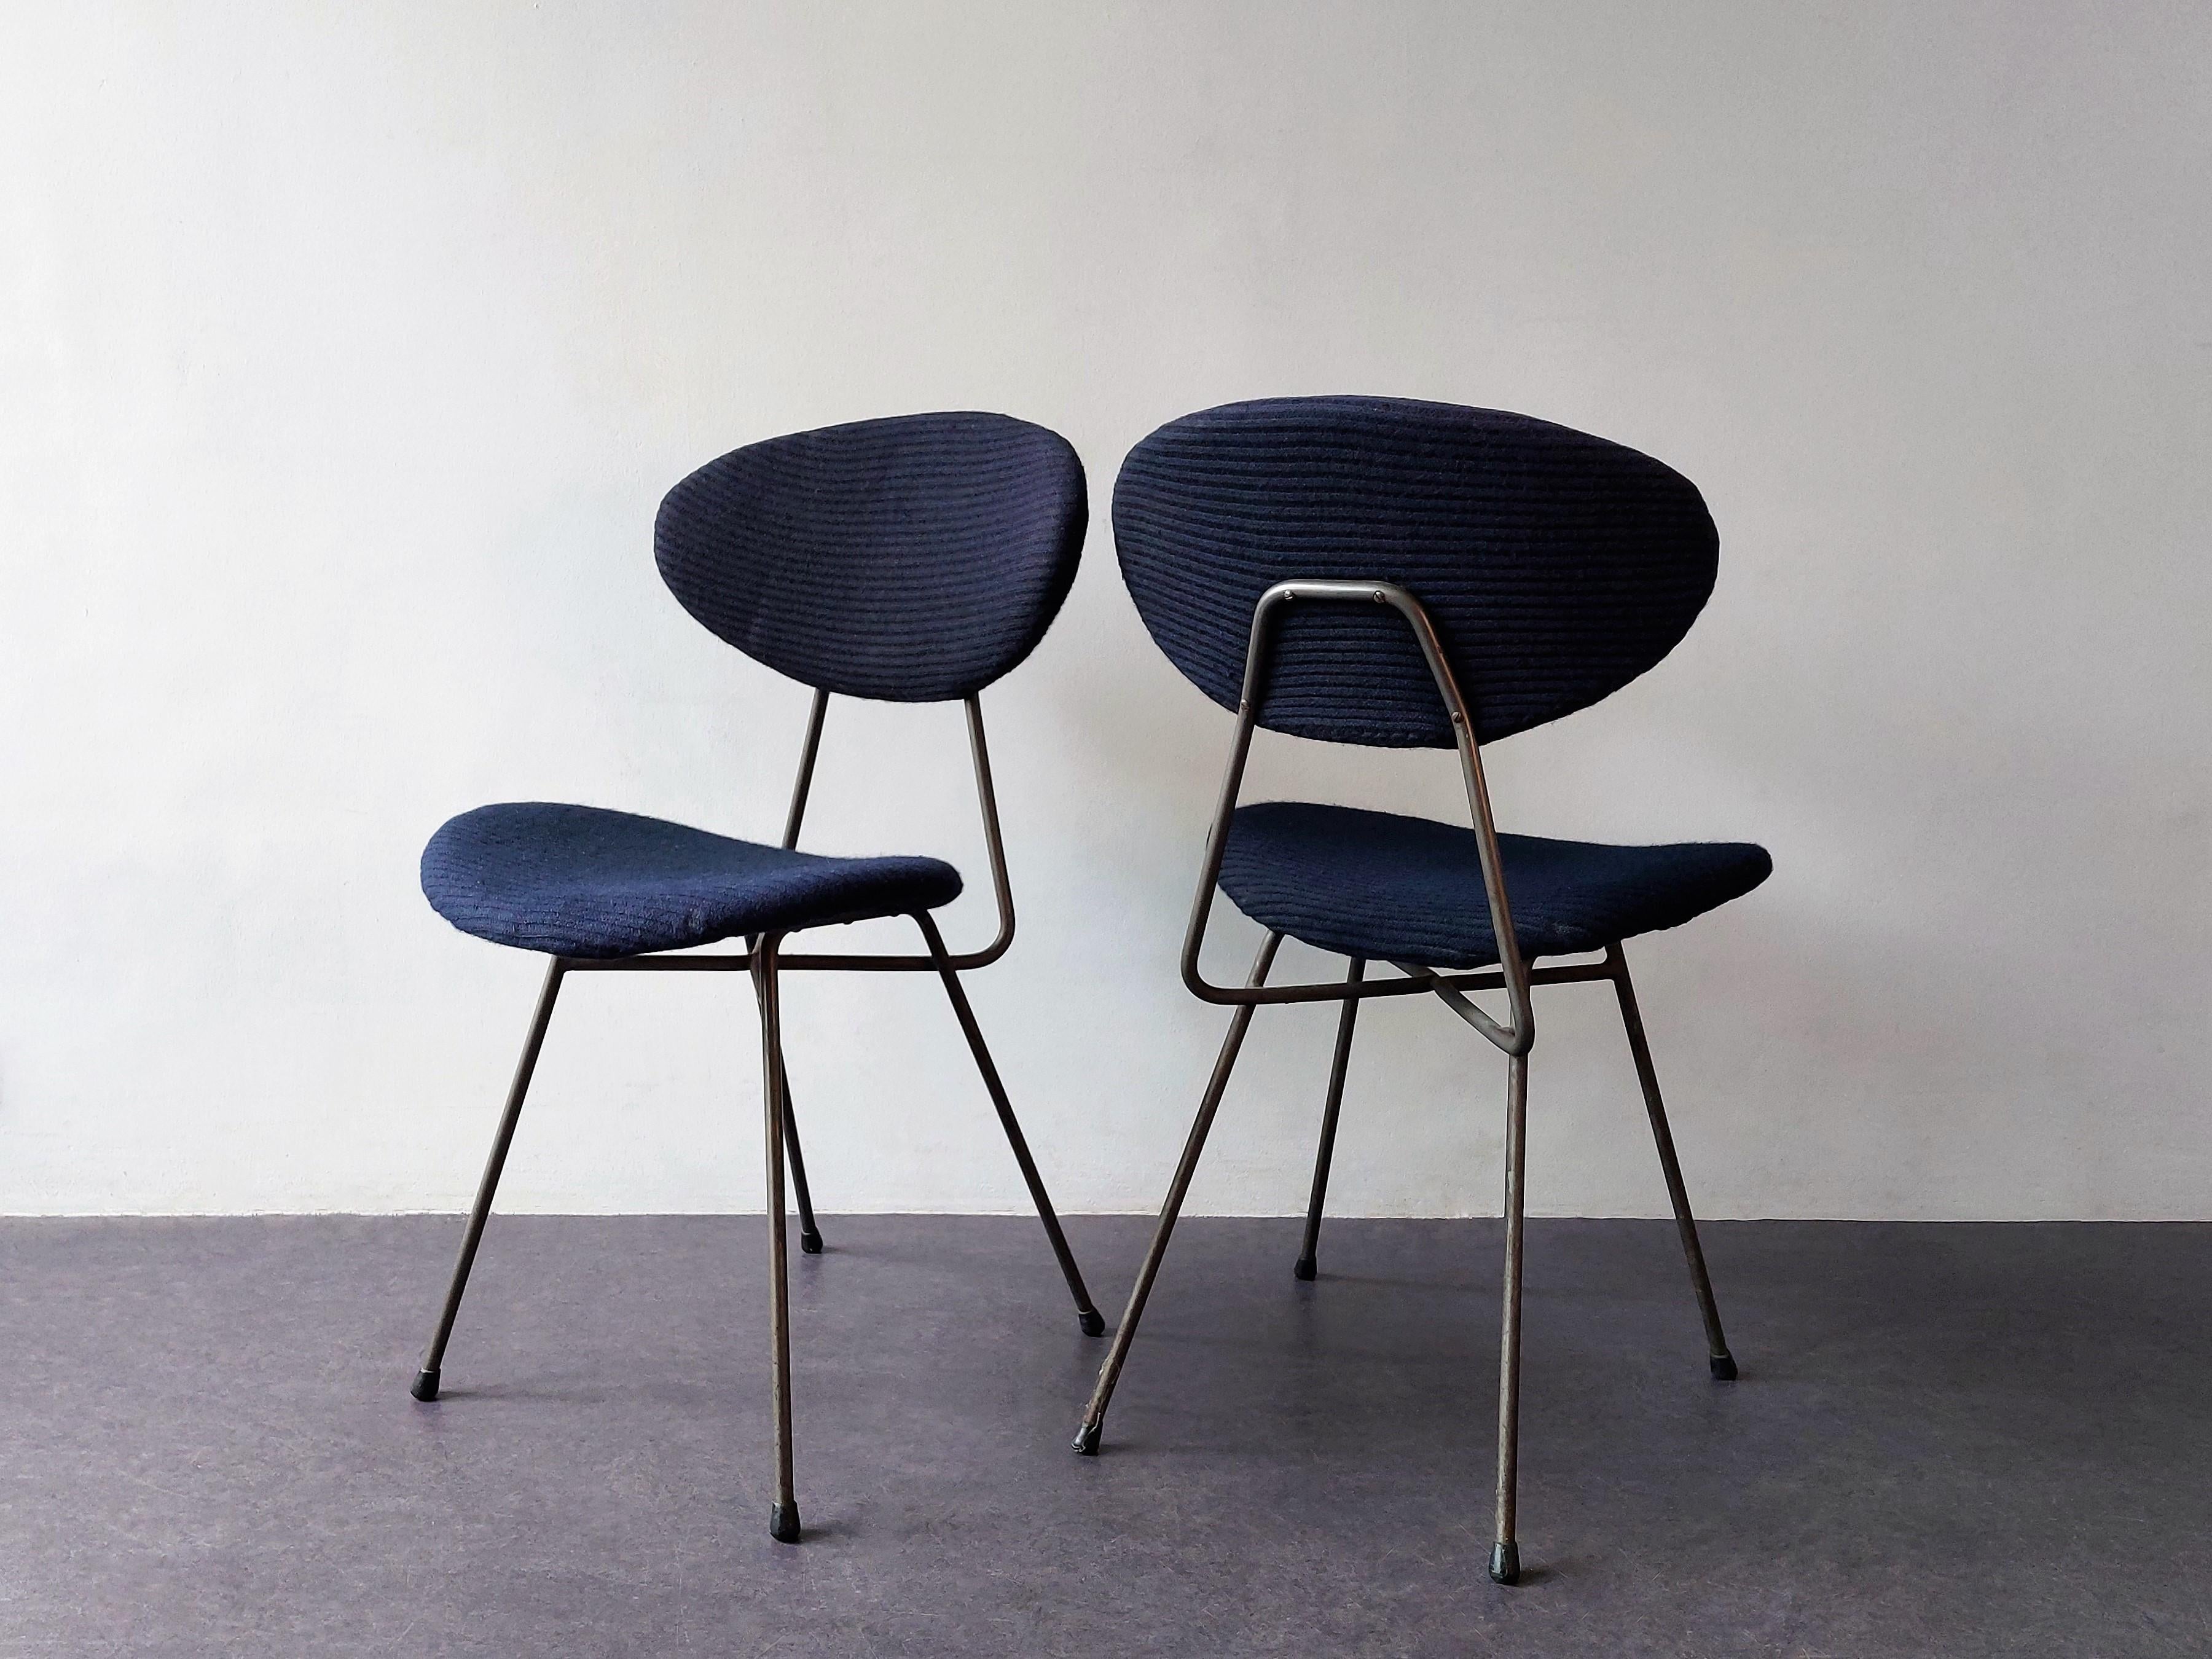 The 'Staatsmijnen' (translated: State mines) chair was designed by Rob Parry and Emile Truijen in 1955. These chairs were only made for the new office of the Dutch State Mining Company (nowadays DSM) at that time. We have a set of 2 chairs available